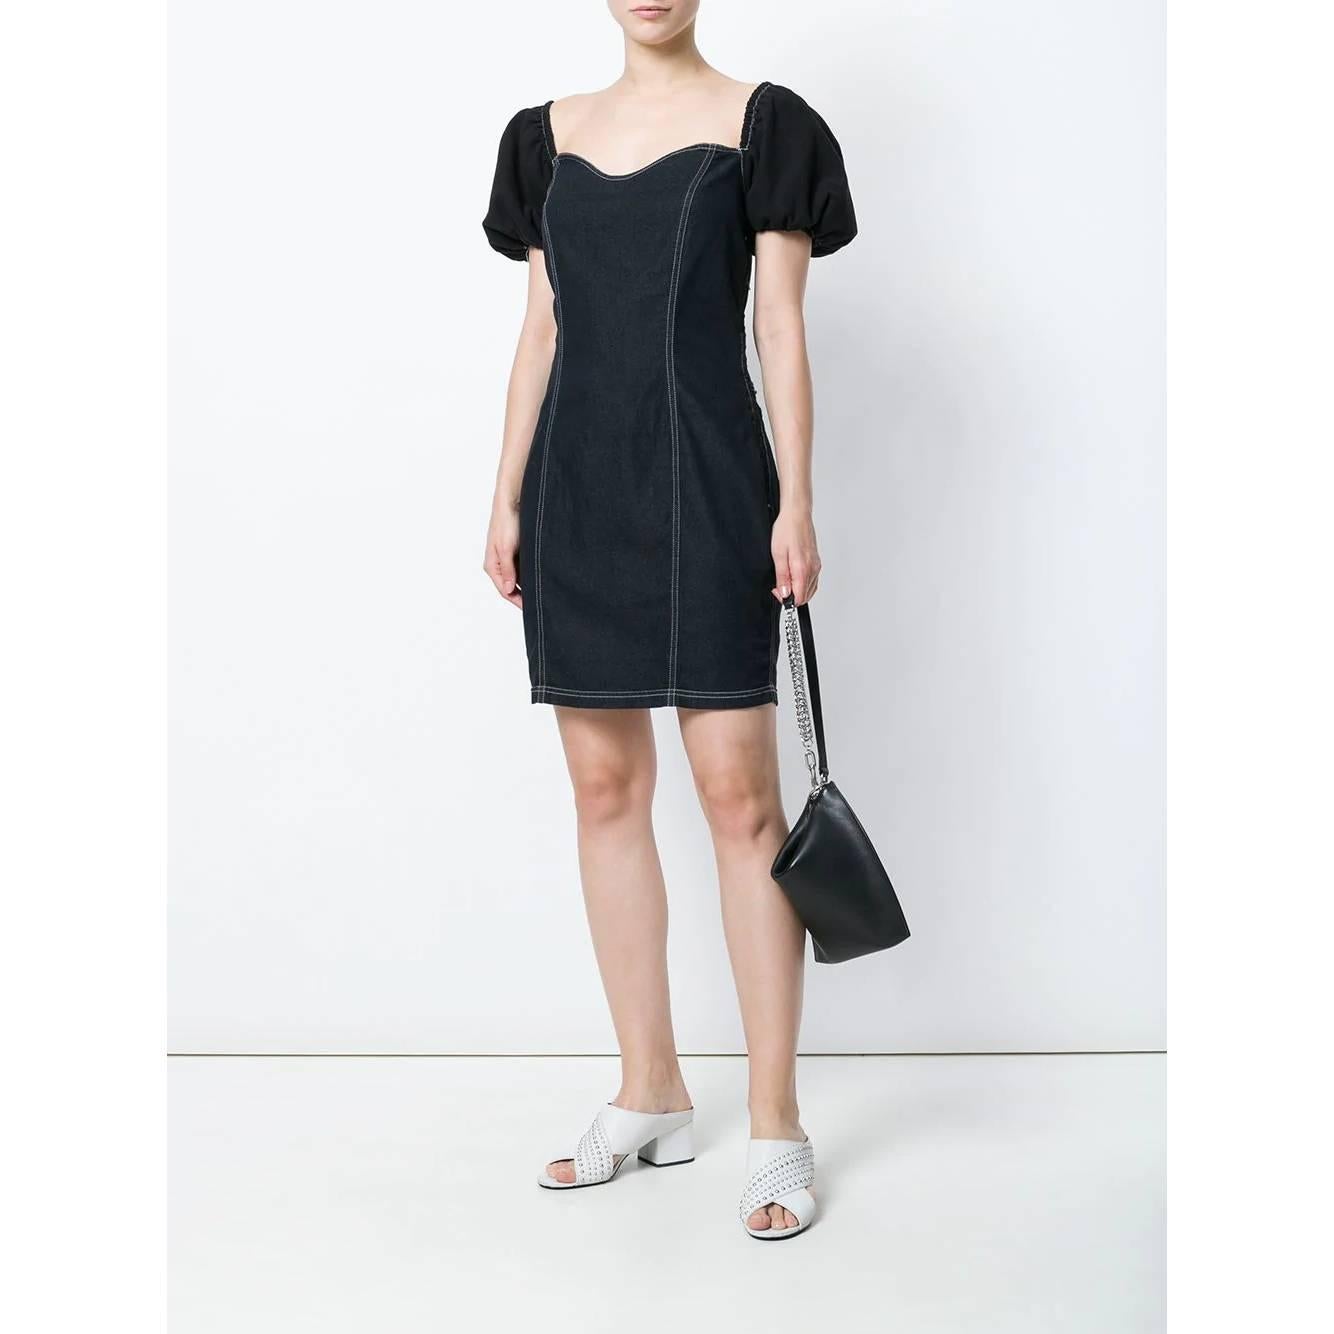 Moschino black cotton blend denim dress with white decorative stitching. Sweetheart neckline, short balloon sleeves and side zip closure. Wide neckline on the back with corset style laces.

Years: 90s

Made in Italy

Size: 44 IT

Flat